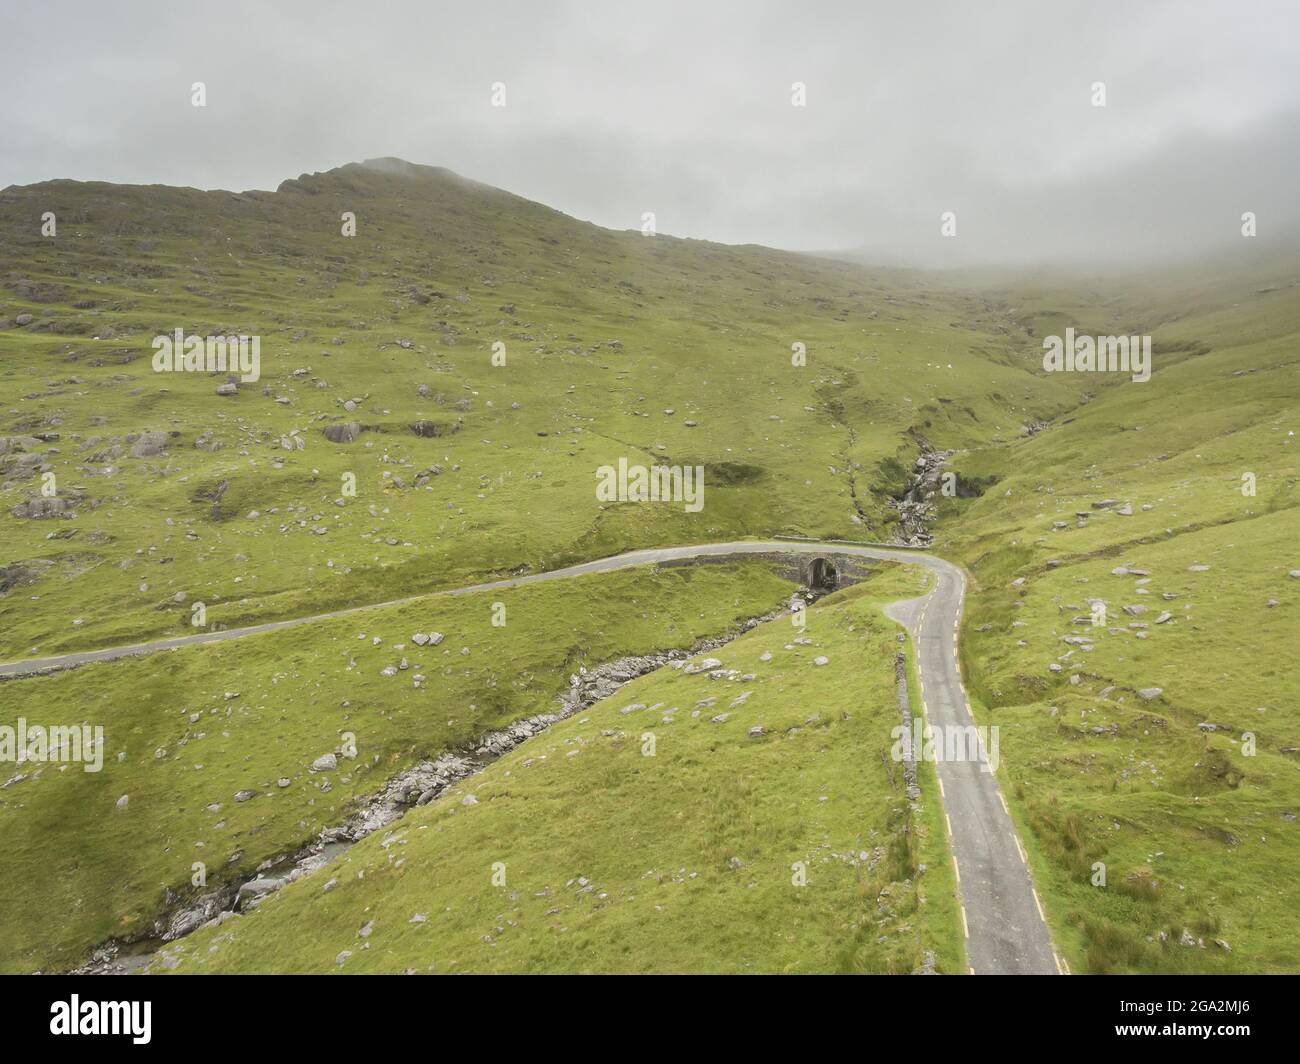 Aerial view of the winding, rural mountainous road (R574) on the Ring of Beara; County Kerry, Ireland Stock Photo